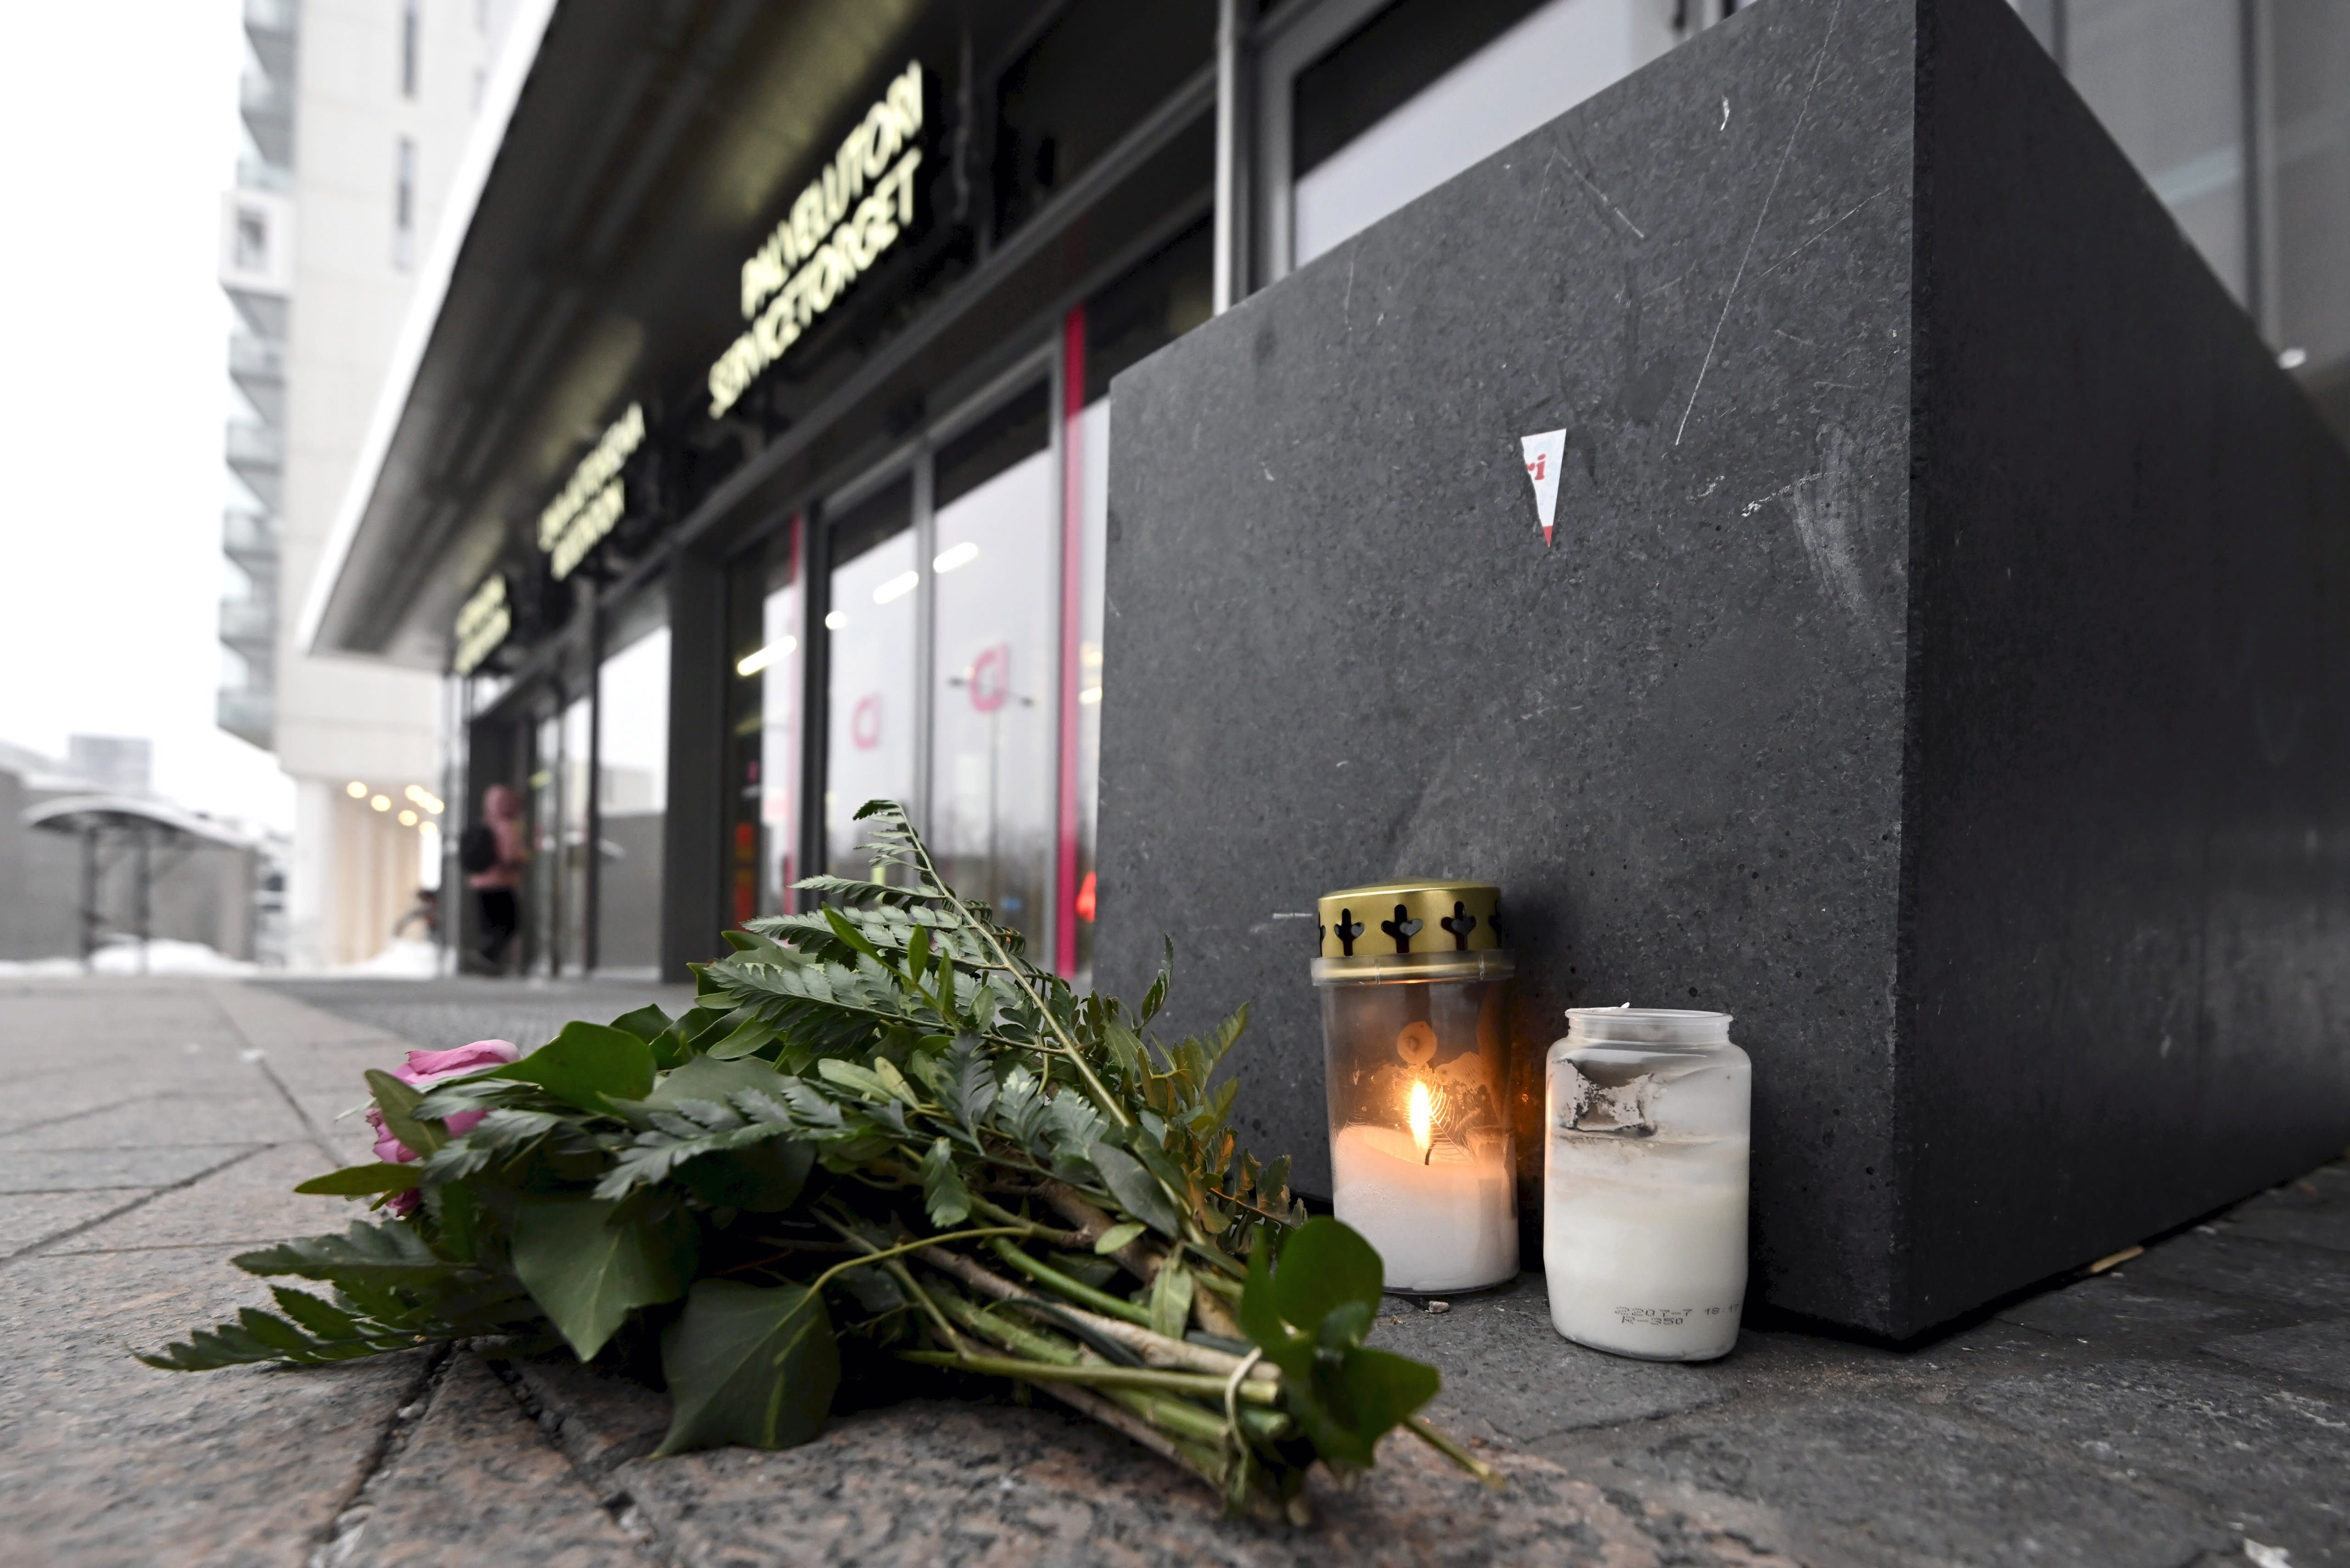 A woman died in the shopping center of Espoo, the security guards are suspected of murder